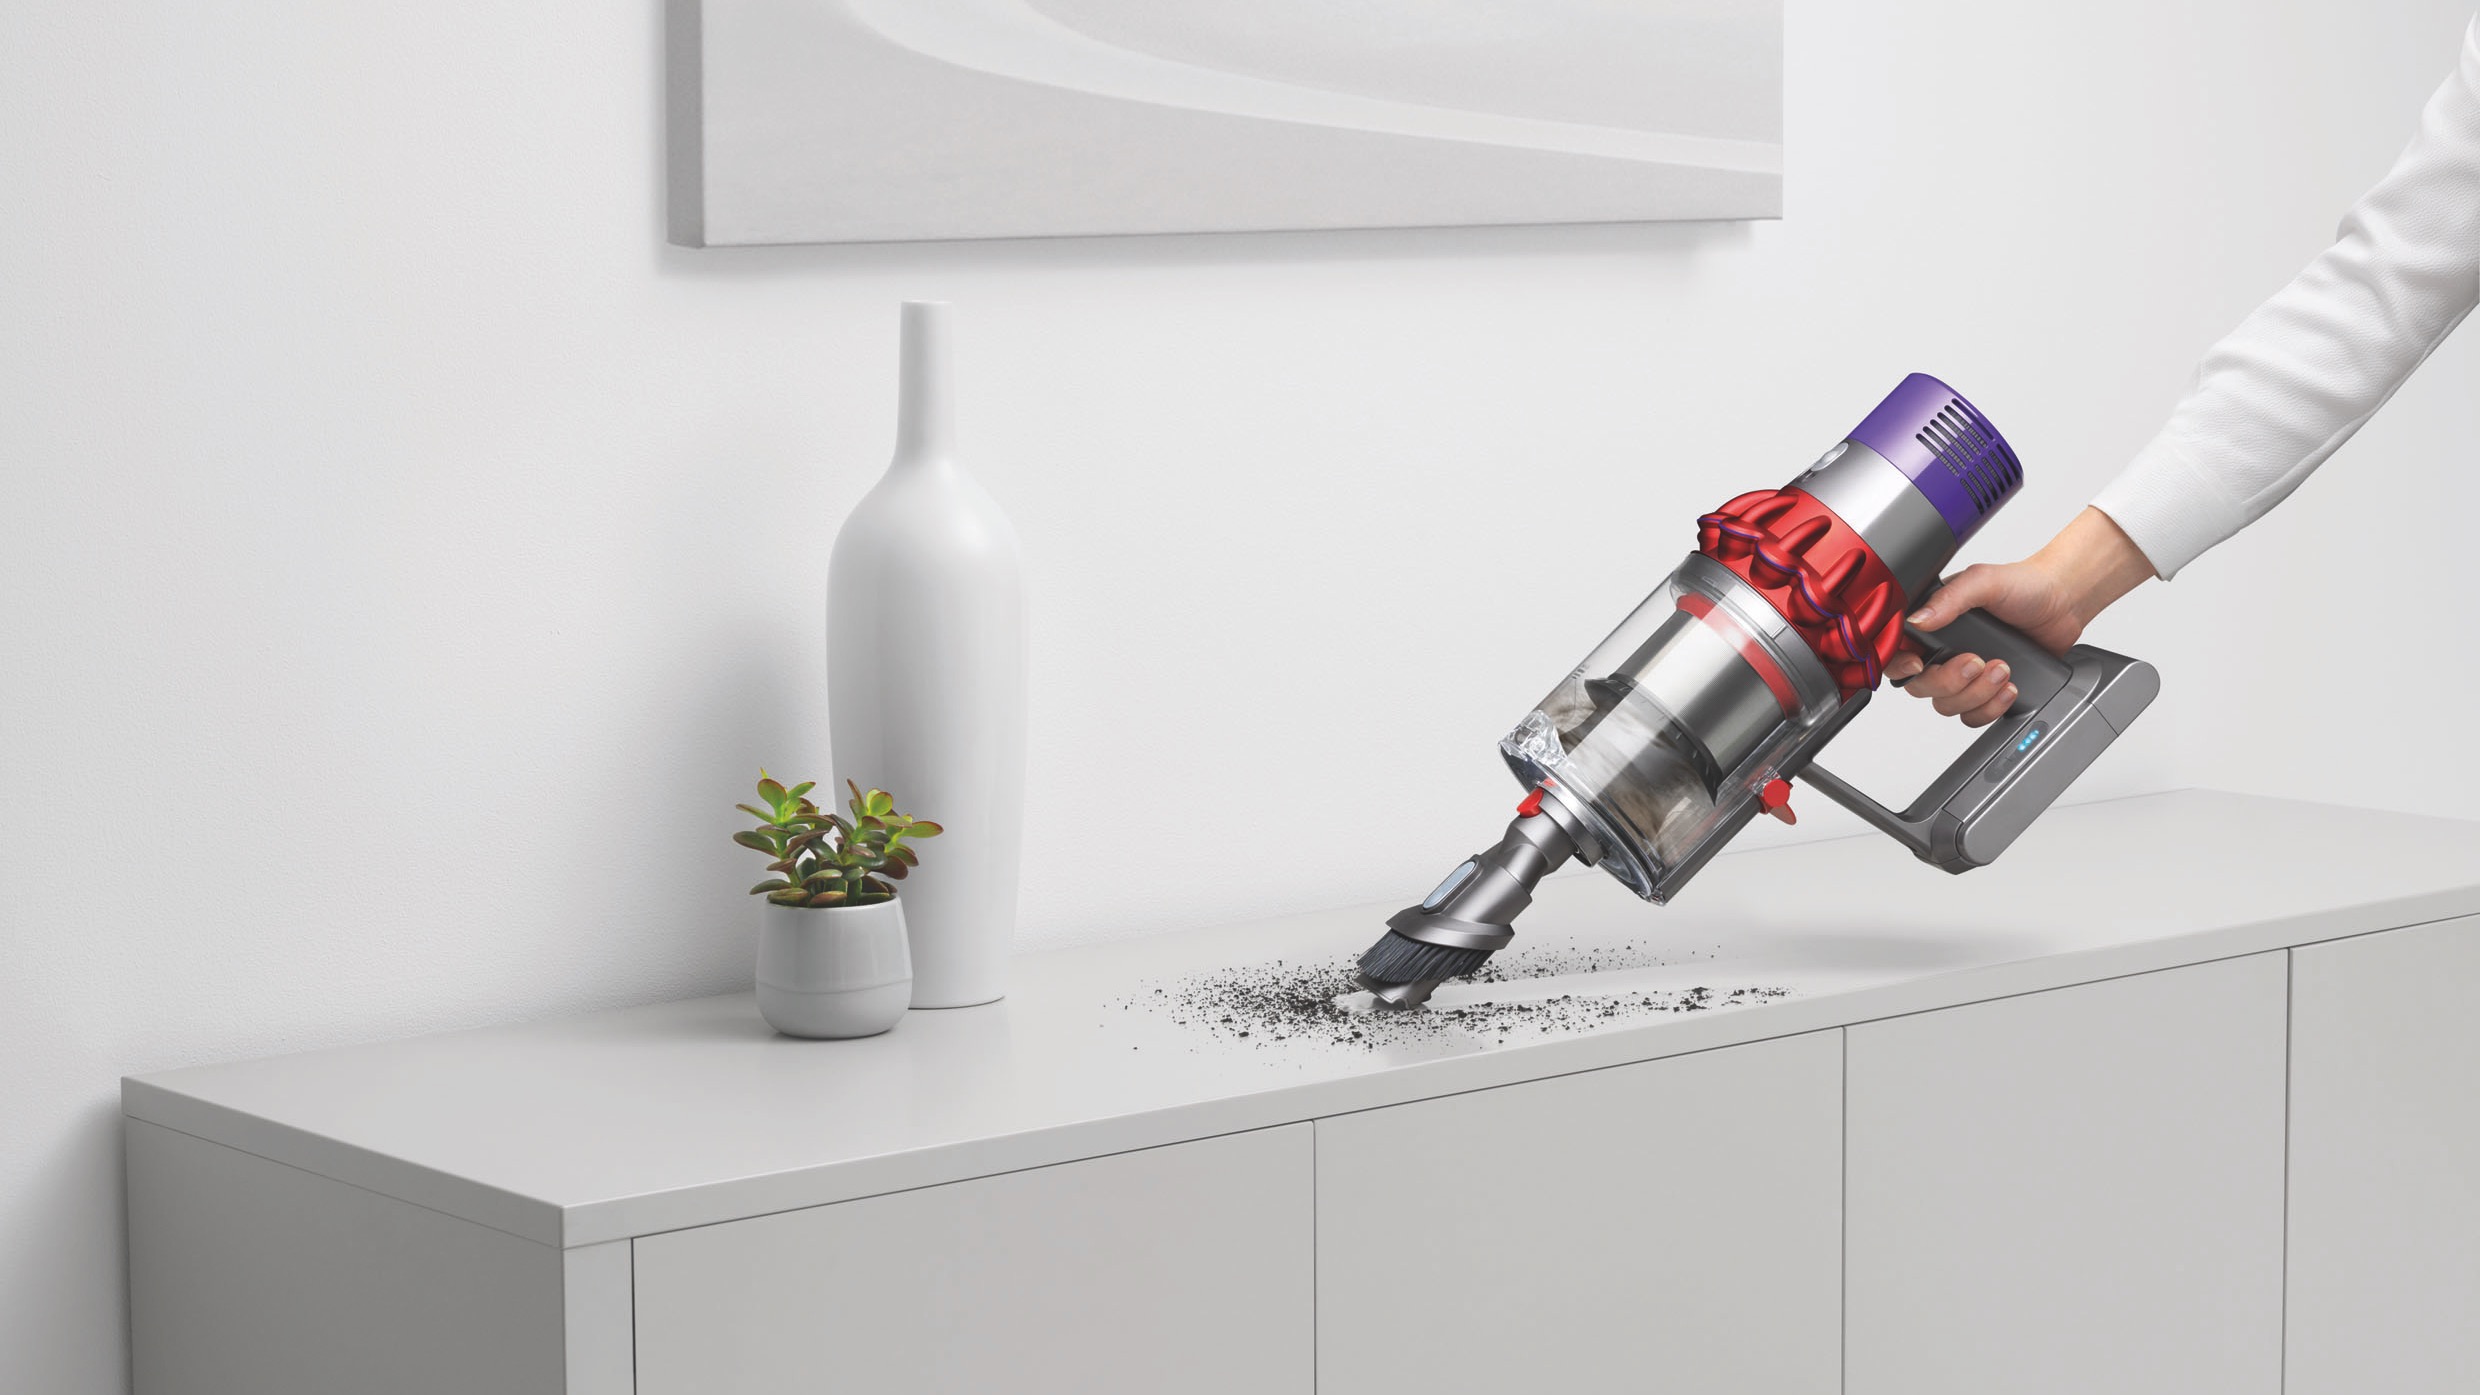 Dyson vacuum cleaner. Пылесос Dyson Cyclone. Cordless Dyson Vacuum Cleaner. Dyson Vacuum Cleaners. Ручной пылесос Dyson Cyclone v10 absolute.